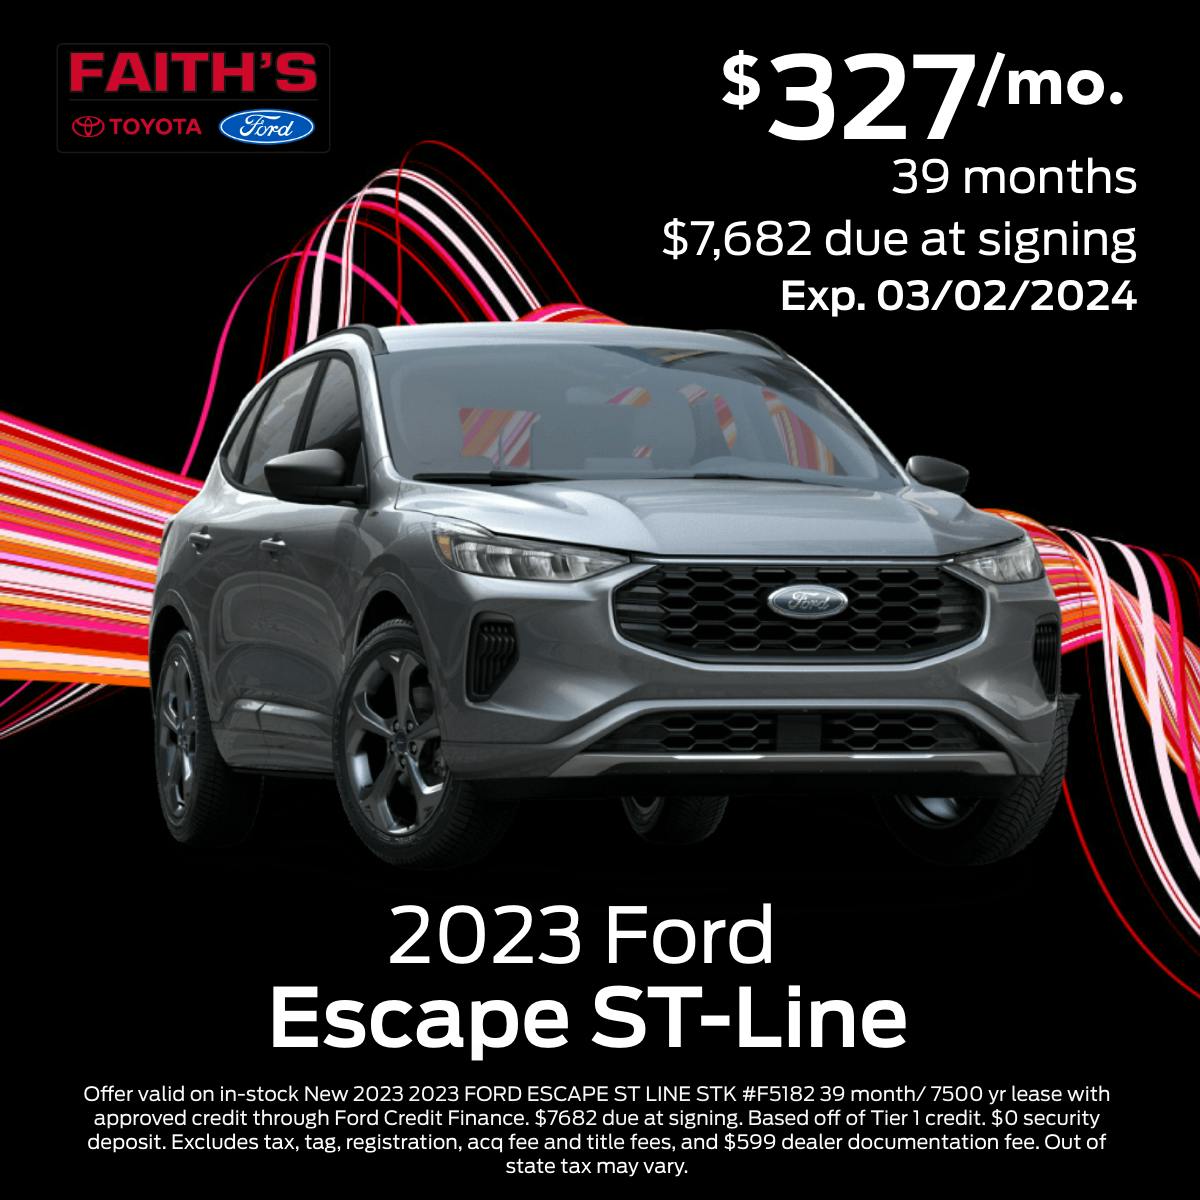 2023 Ford Escape ST-Line Lease Offer | Faiths Ford